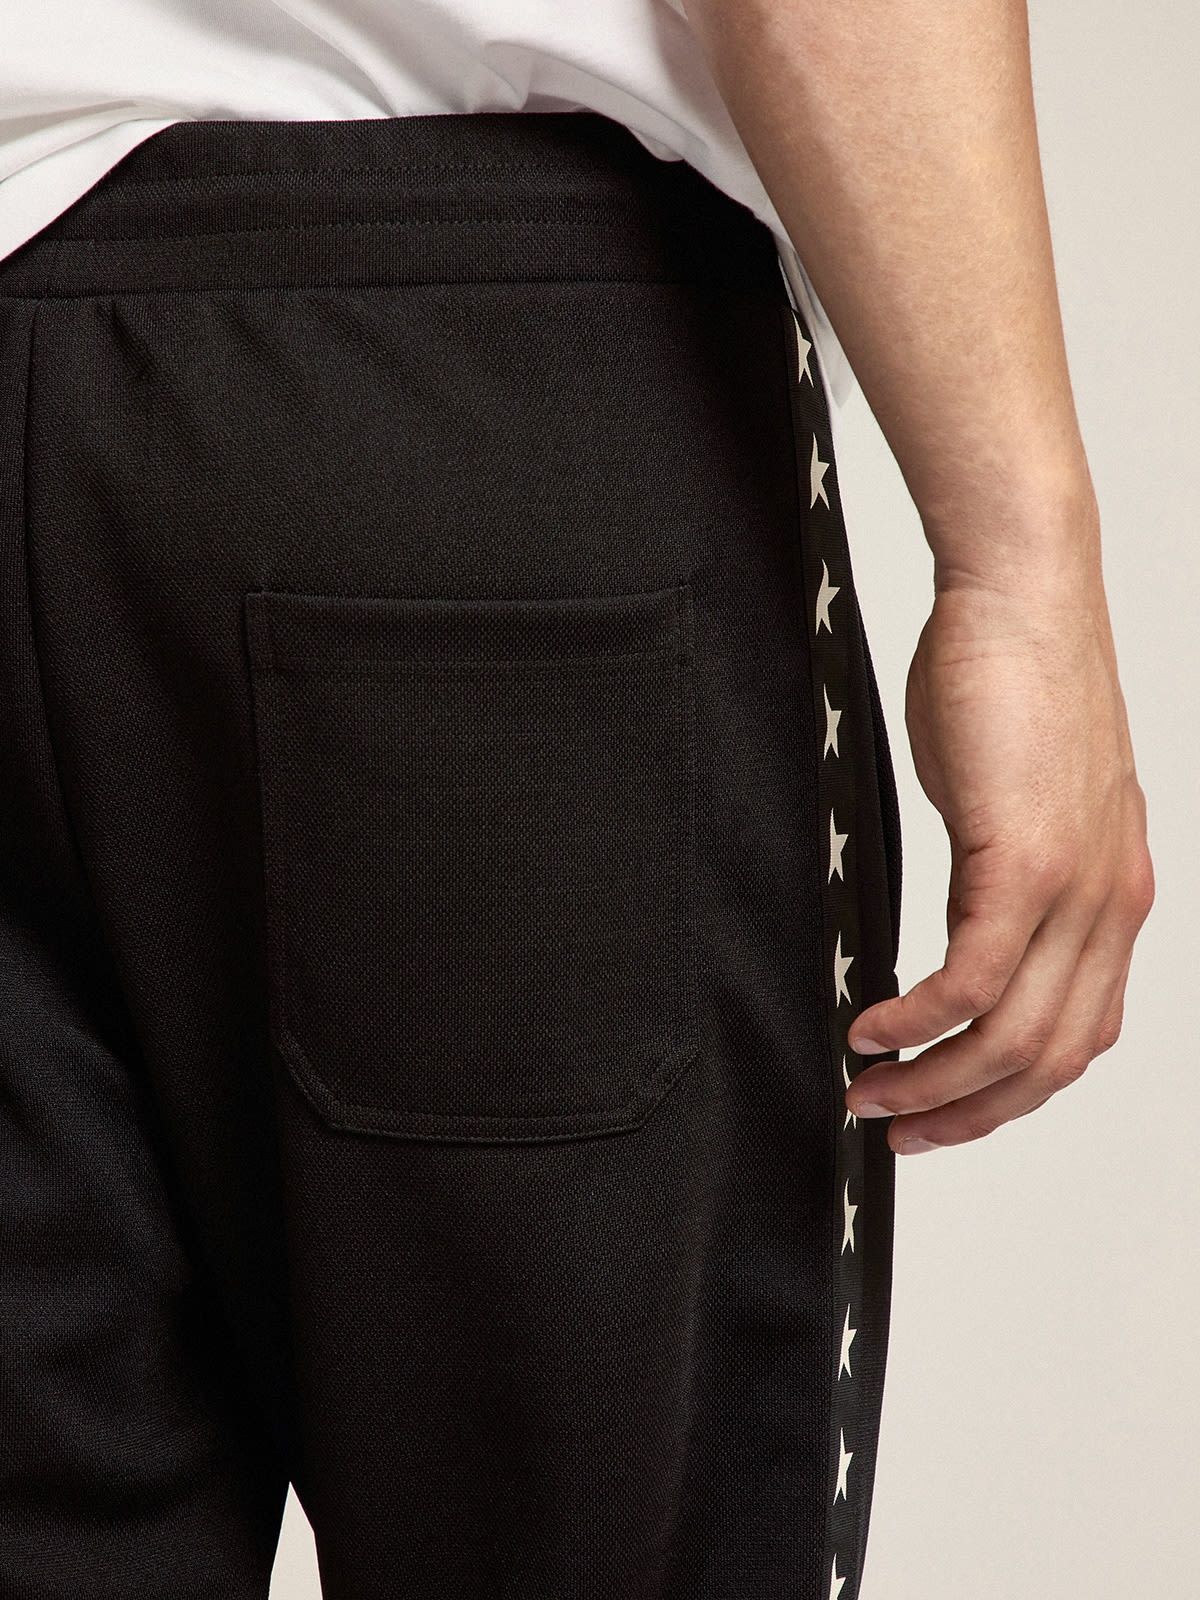 Men's black joggers with white stars on the sides - 4